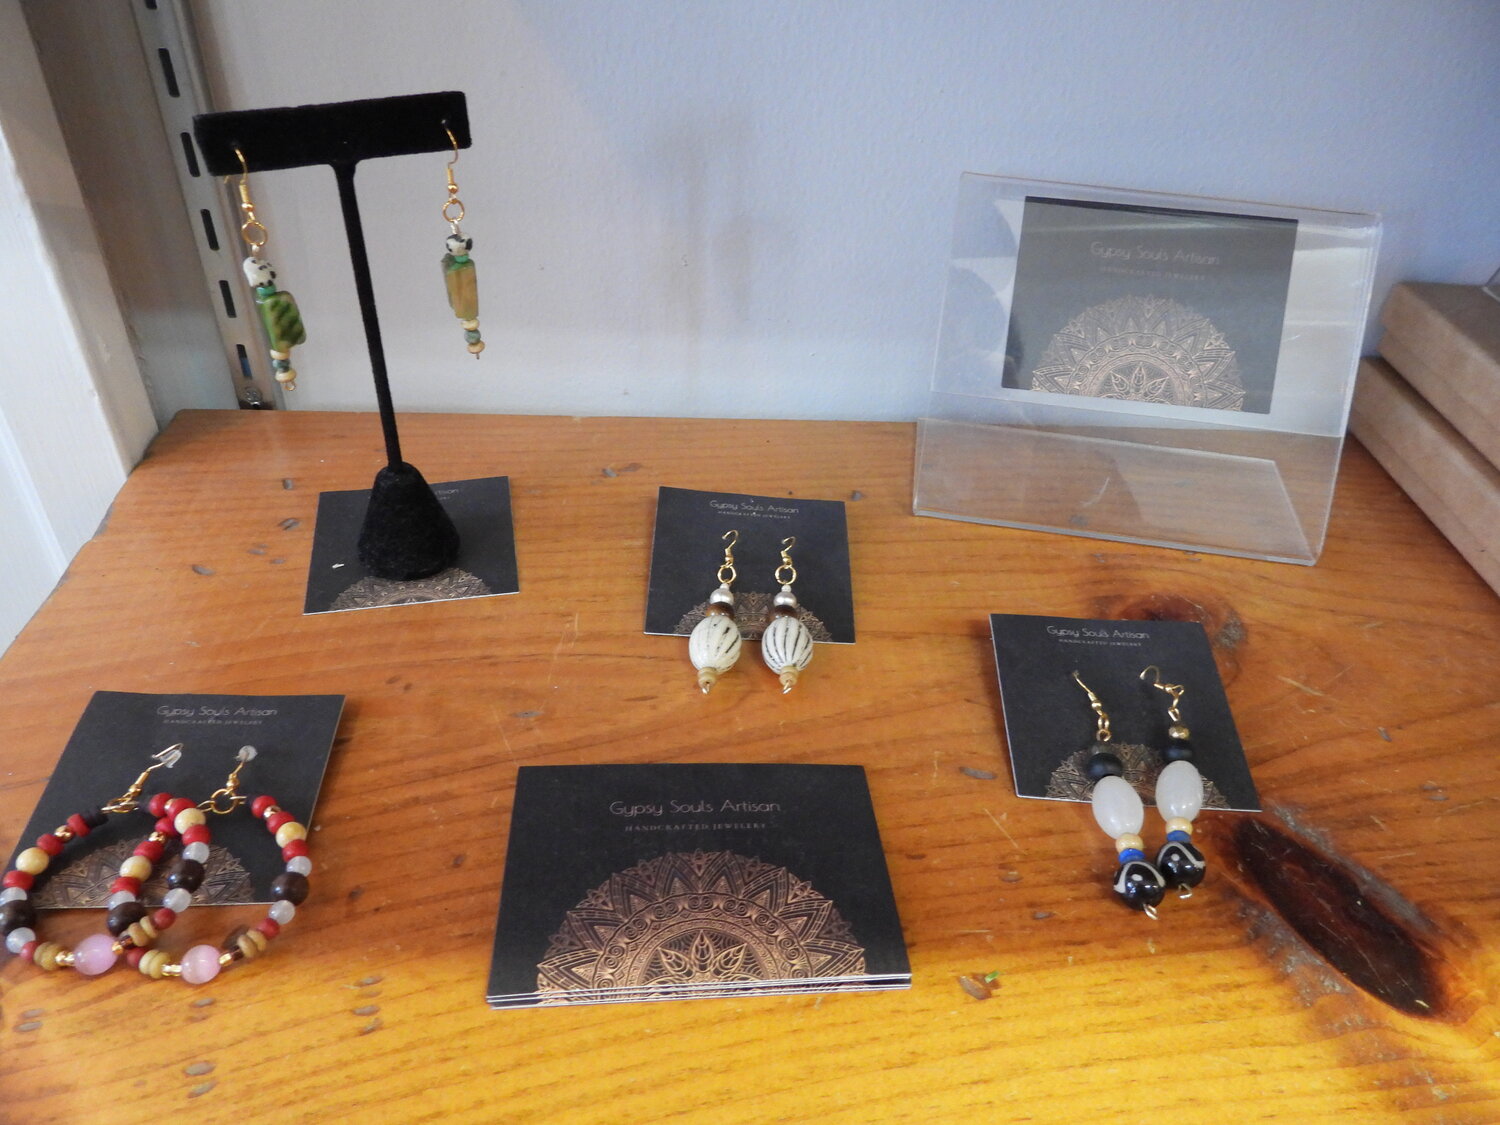 Gypsy Soul Artisan sells jewelry at White Begonia.